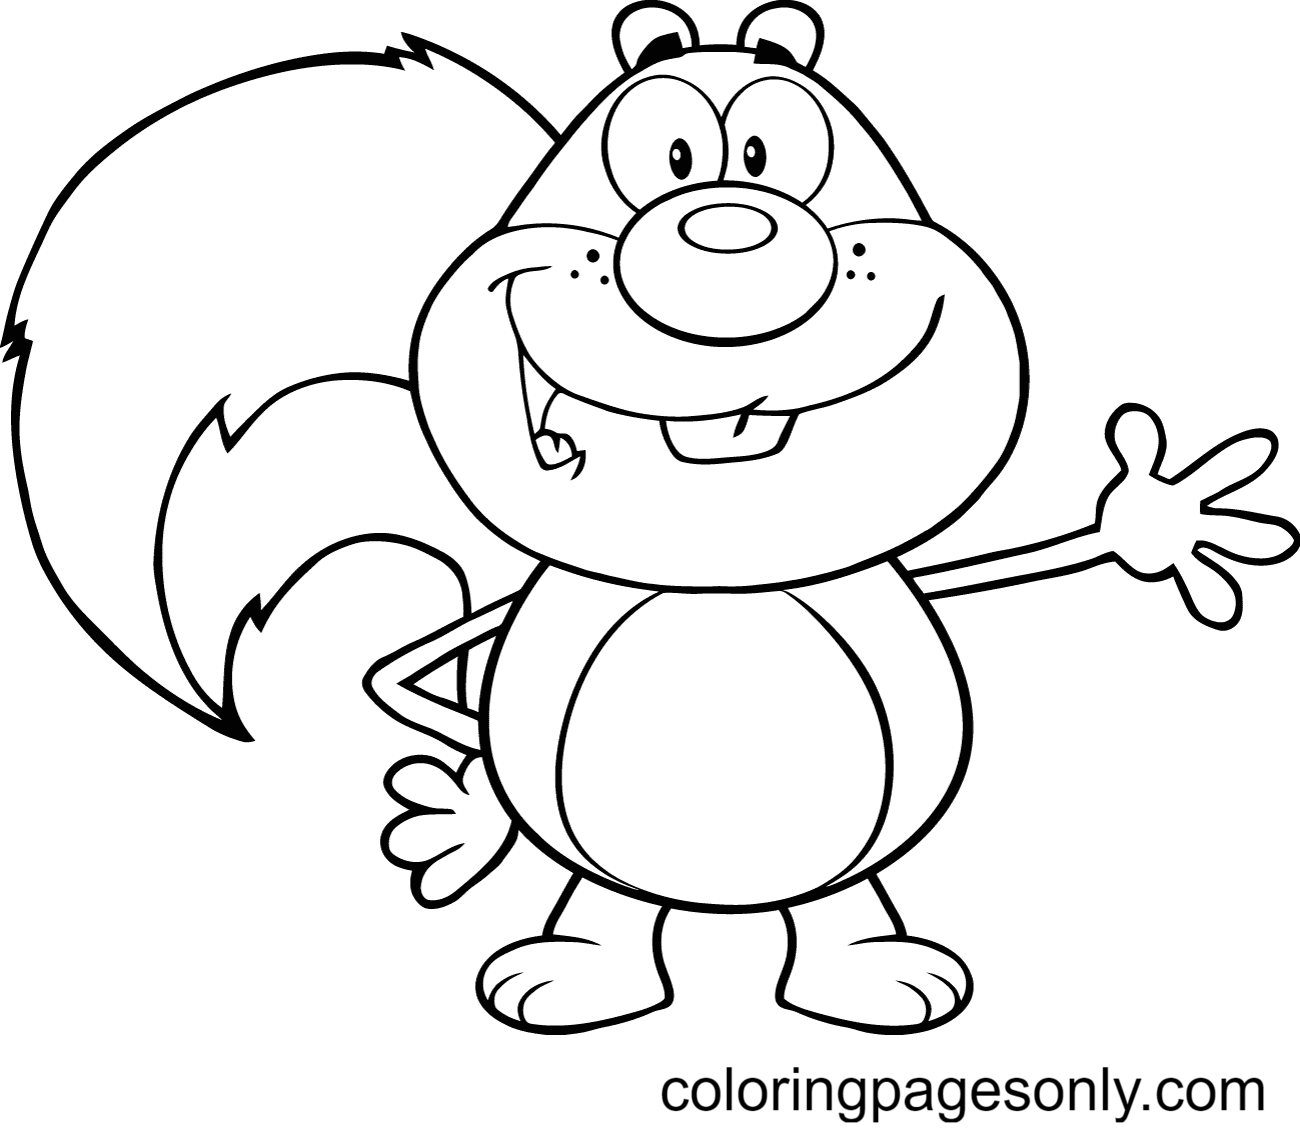 Smiling Cartoon Squirrel Waving Coloring Pages